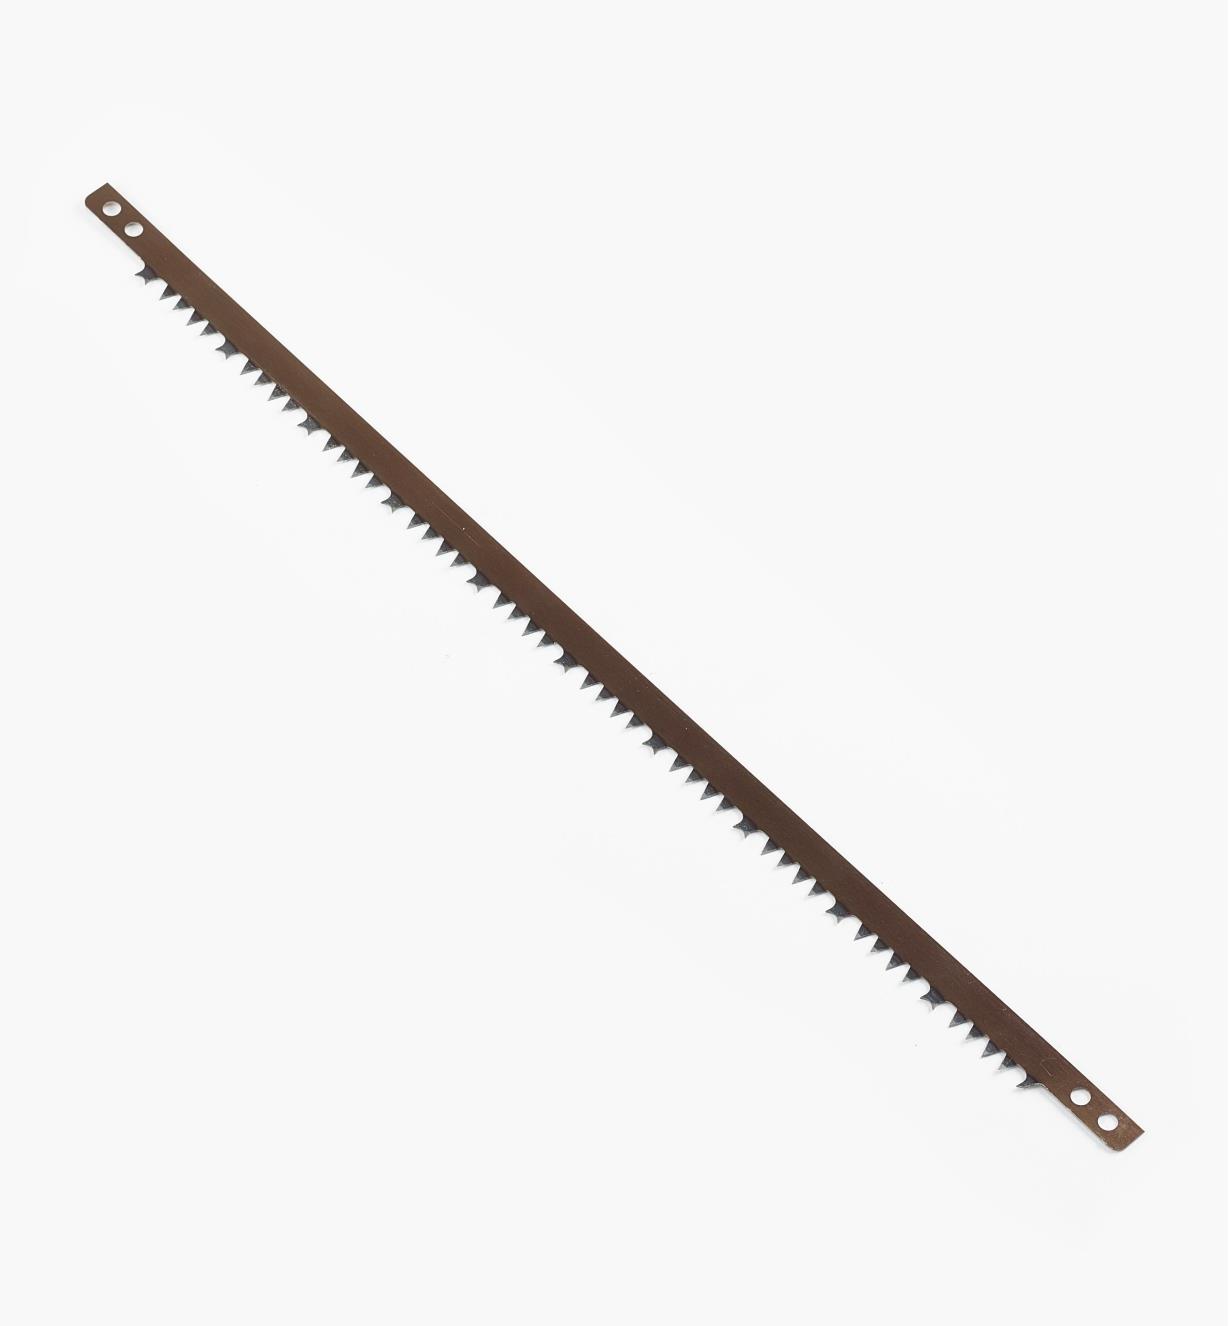 13T0123 - Repl. Blade for European Buck Saw, 21"